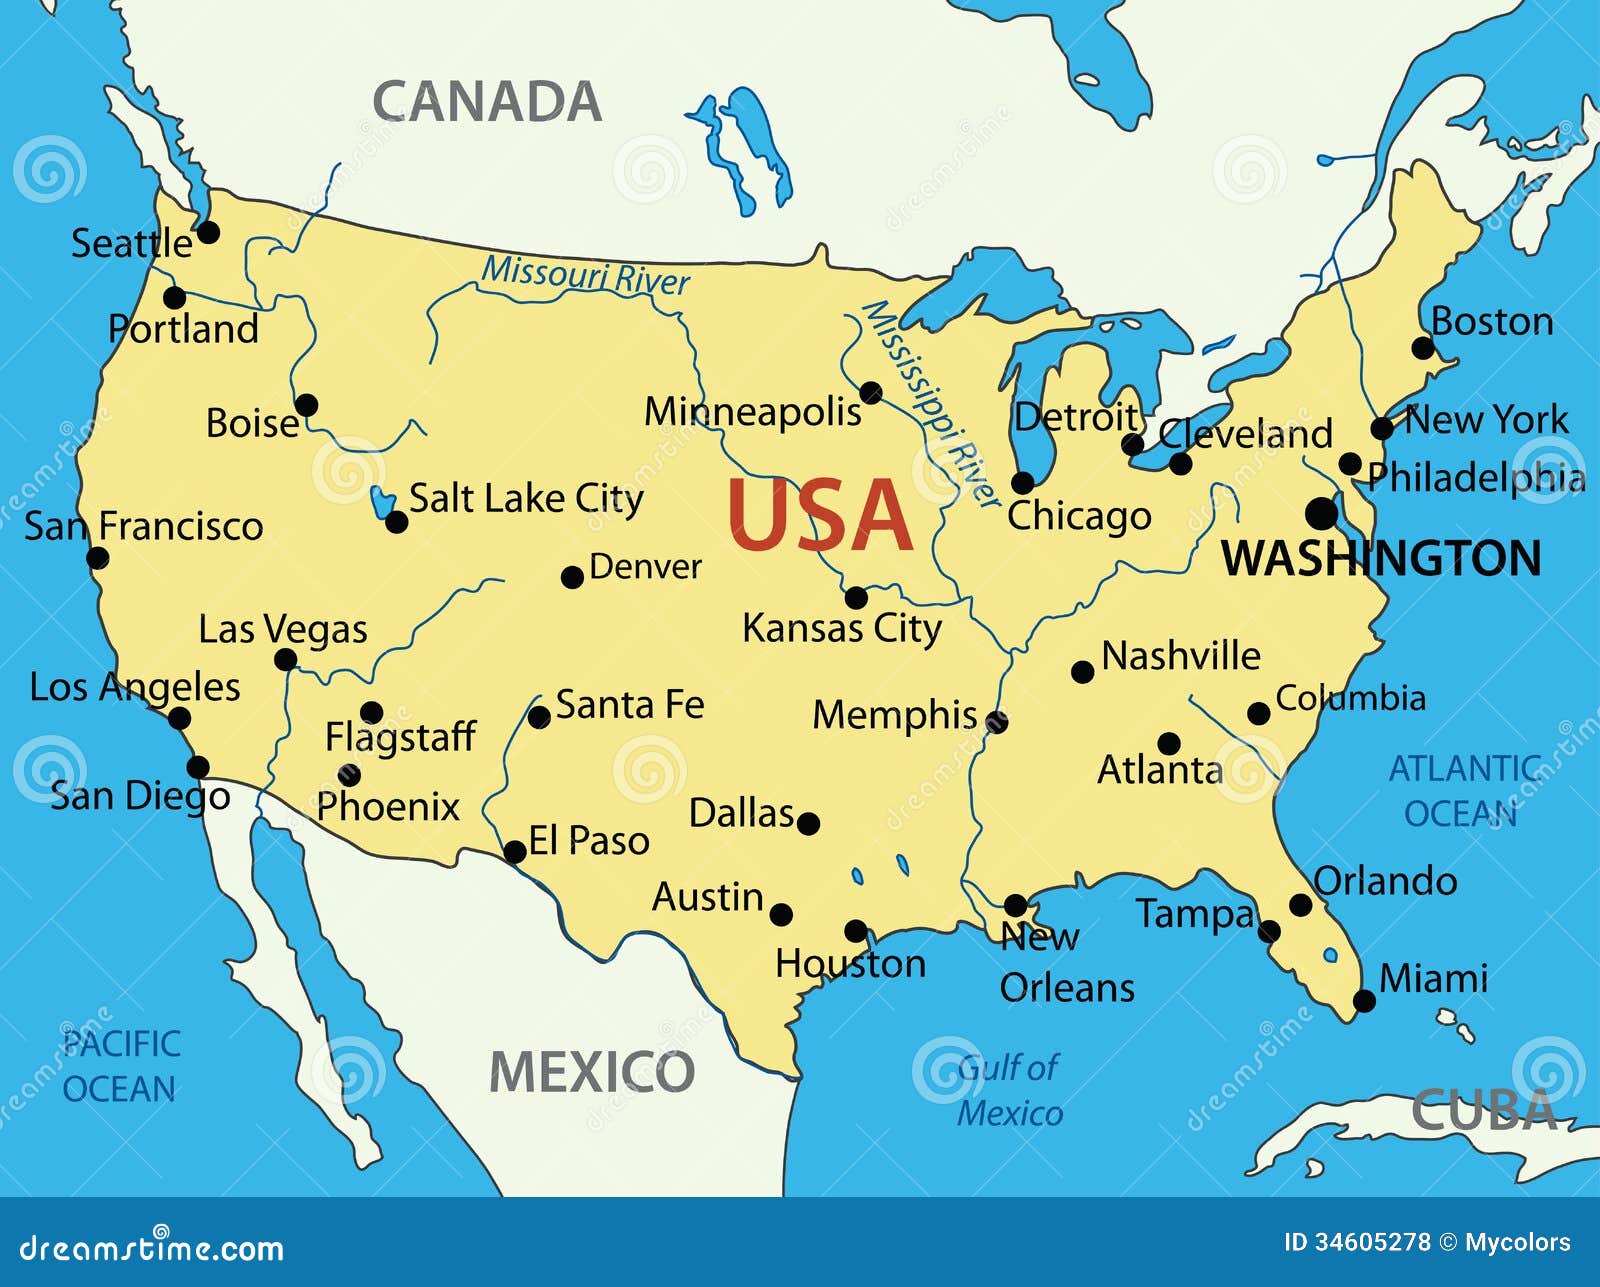 The United States Of America Vector Map Royalty Free Stock Photos